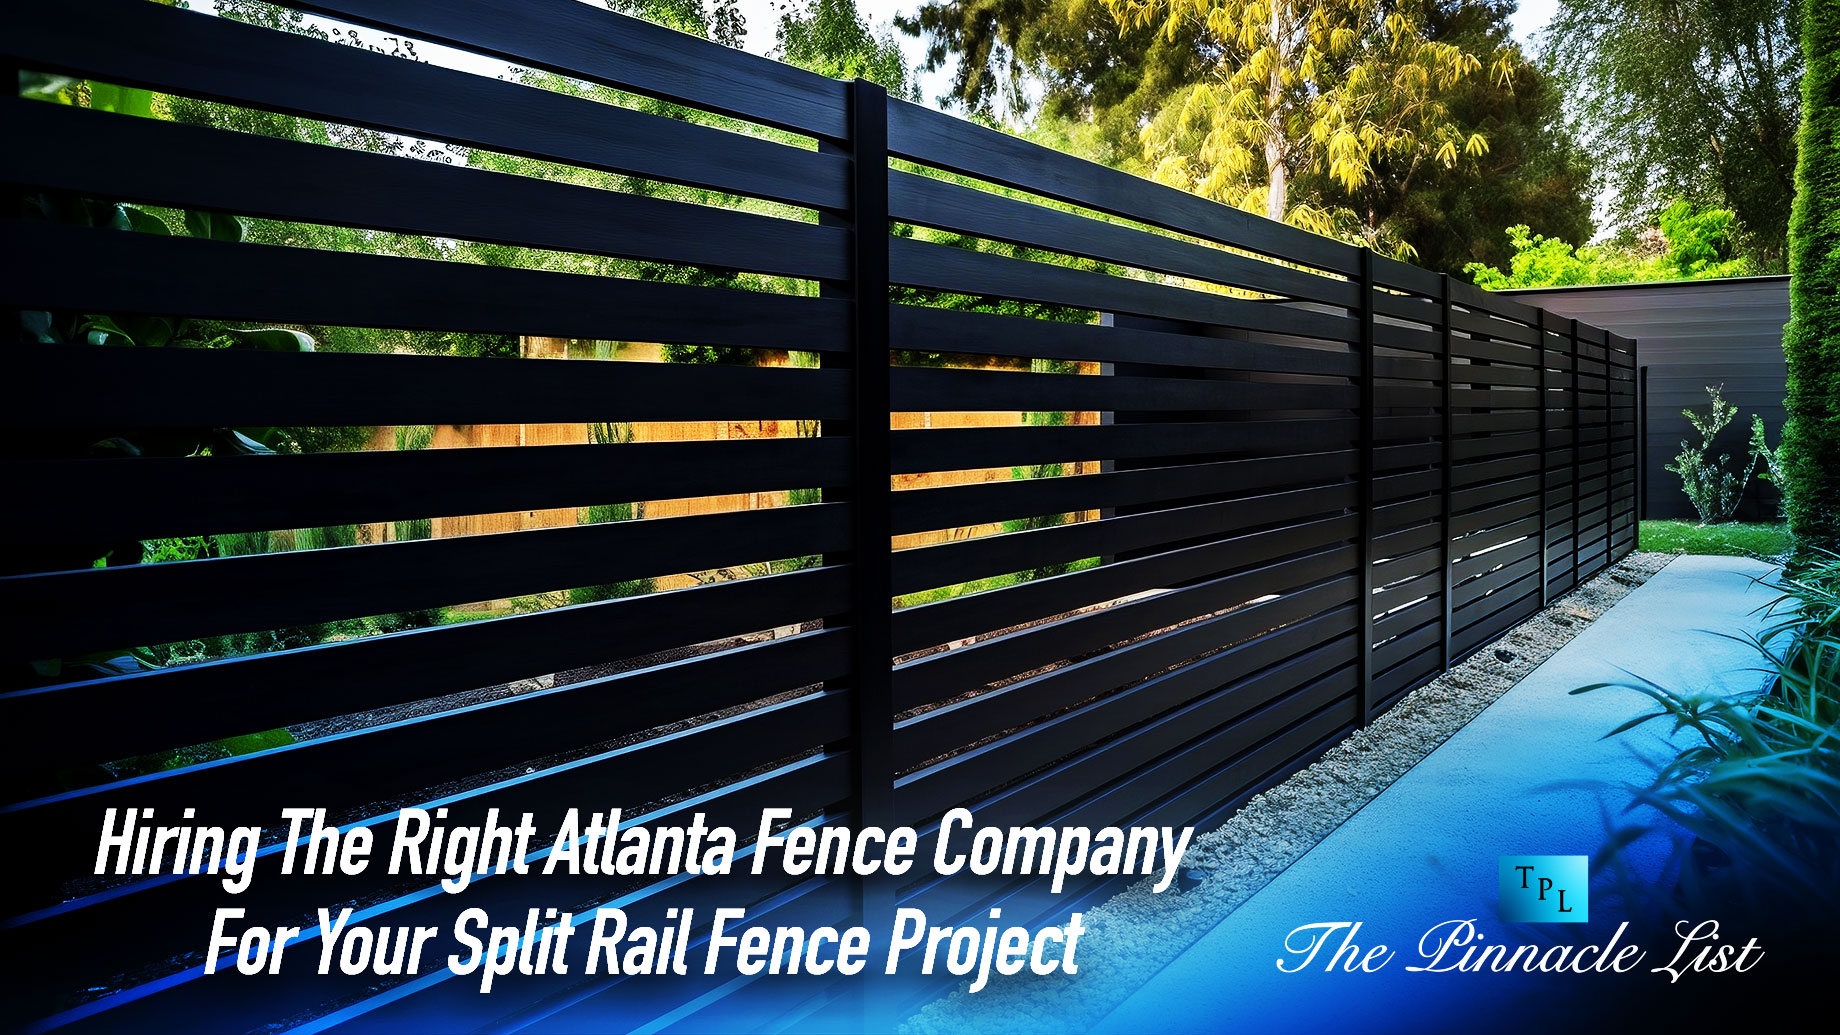 Hiring The Right Atlanta Fence Company For Your Split Rail Fence Project